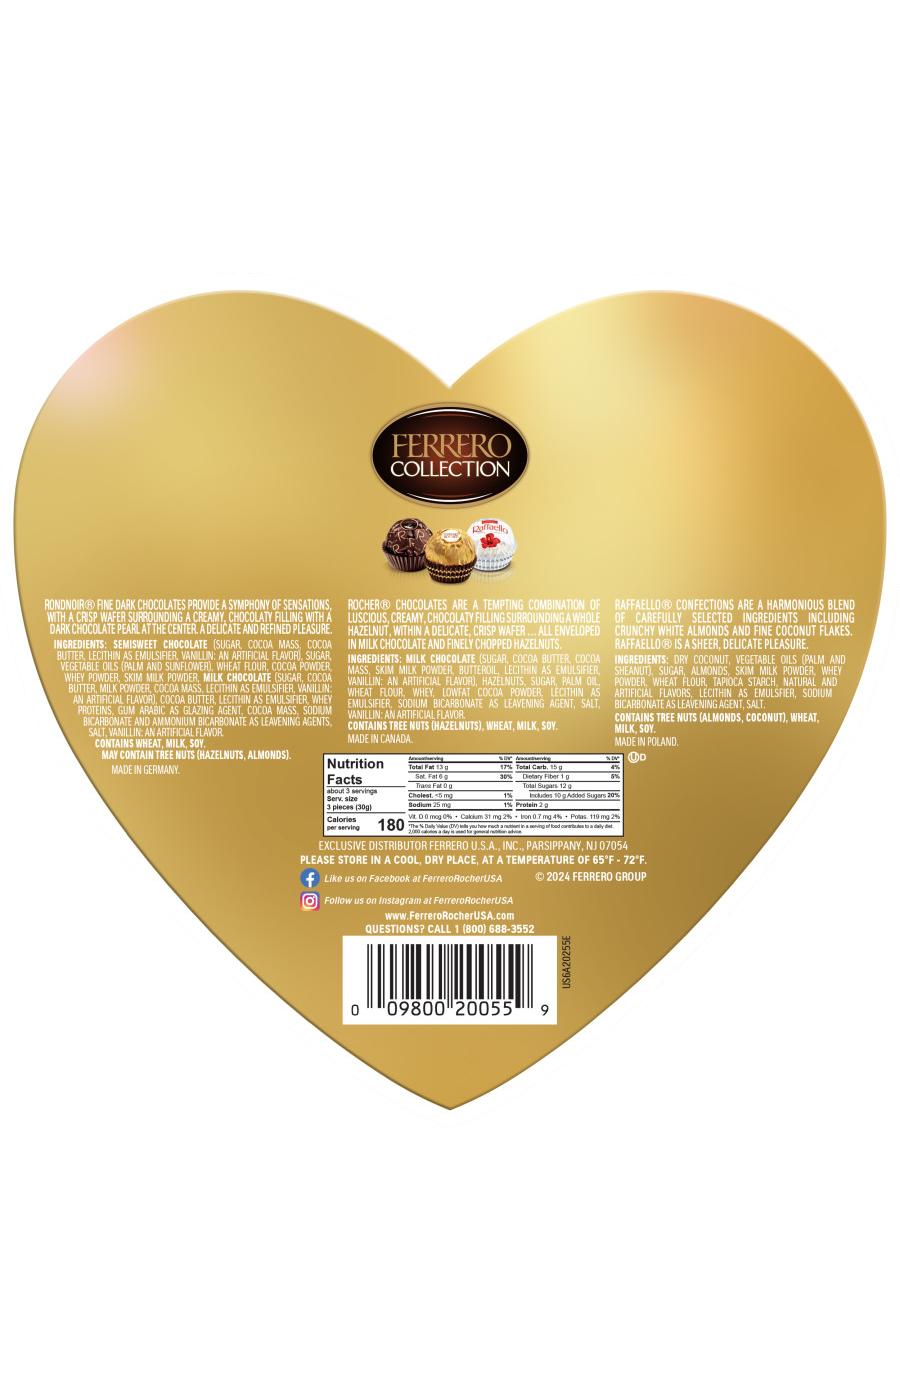 Ferrero Collection Fine Assorted Confections Valentine's Heart Gift Box, 10 Pc; image 2 of 2